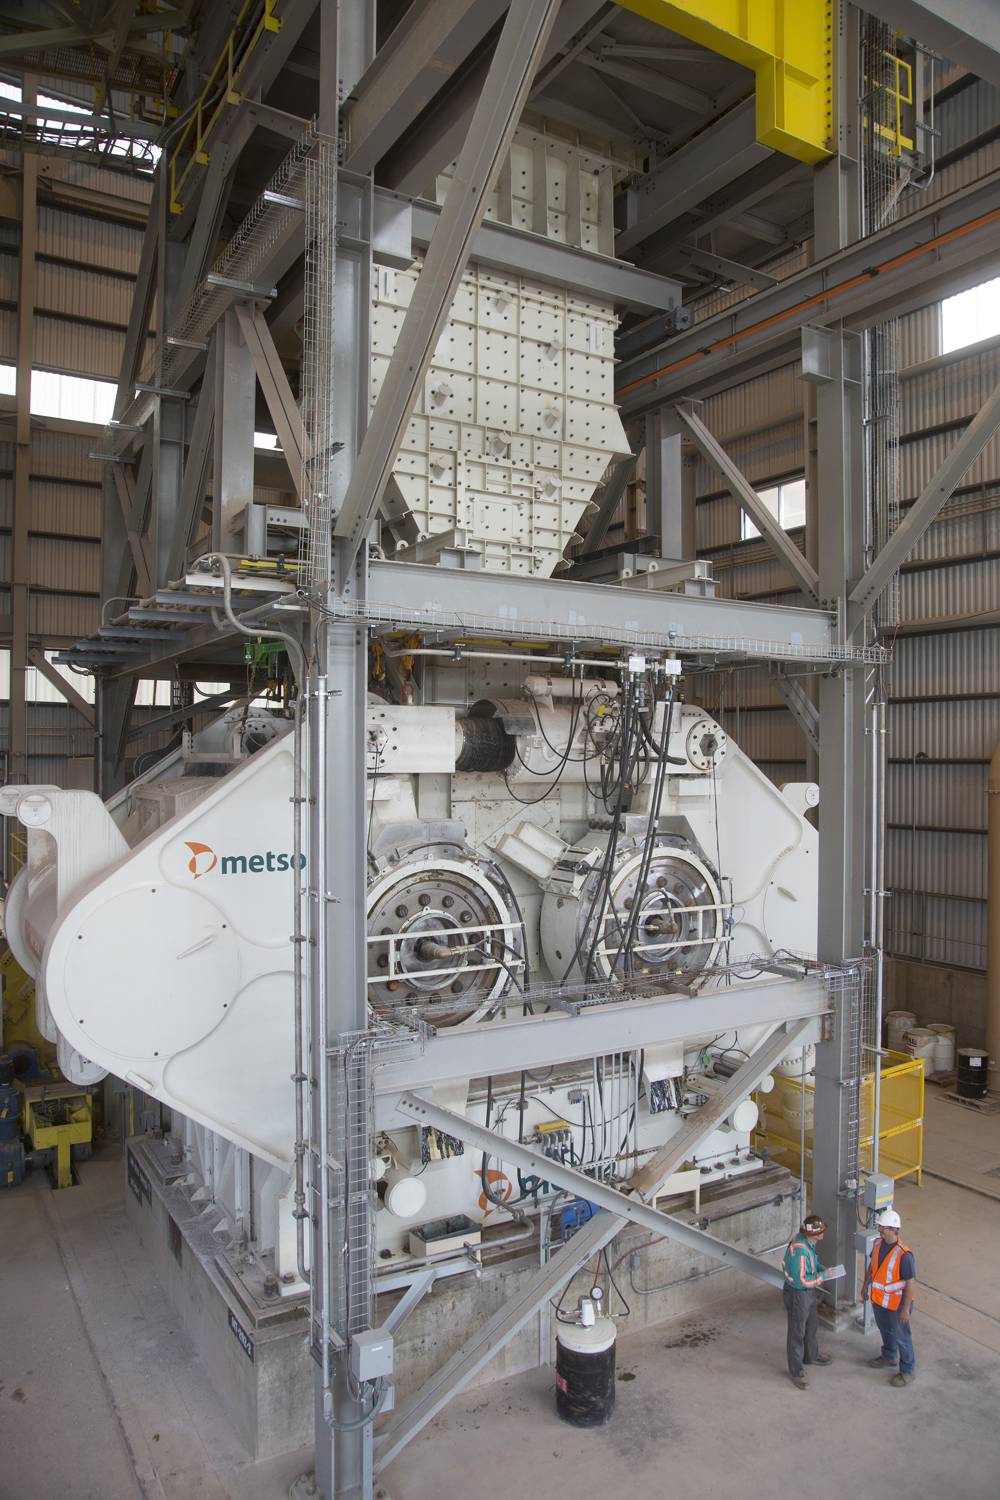 Metso's HRCTM3000 high-pressure grinding roll is the largest unit of its kind.